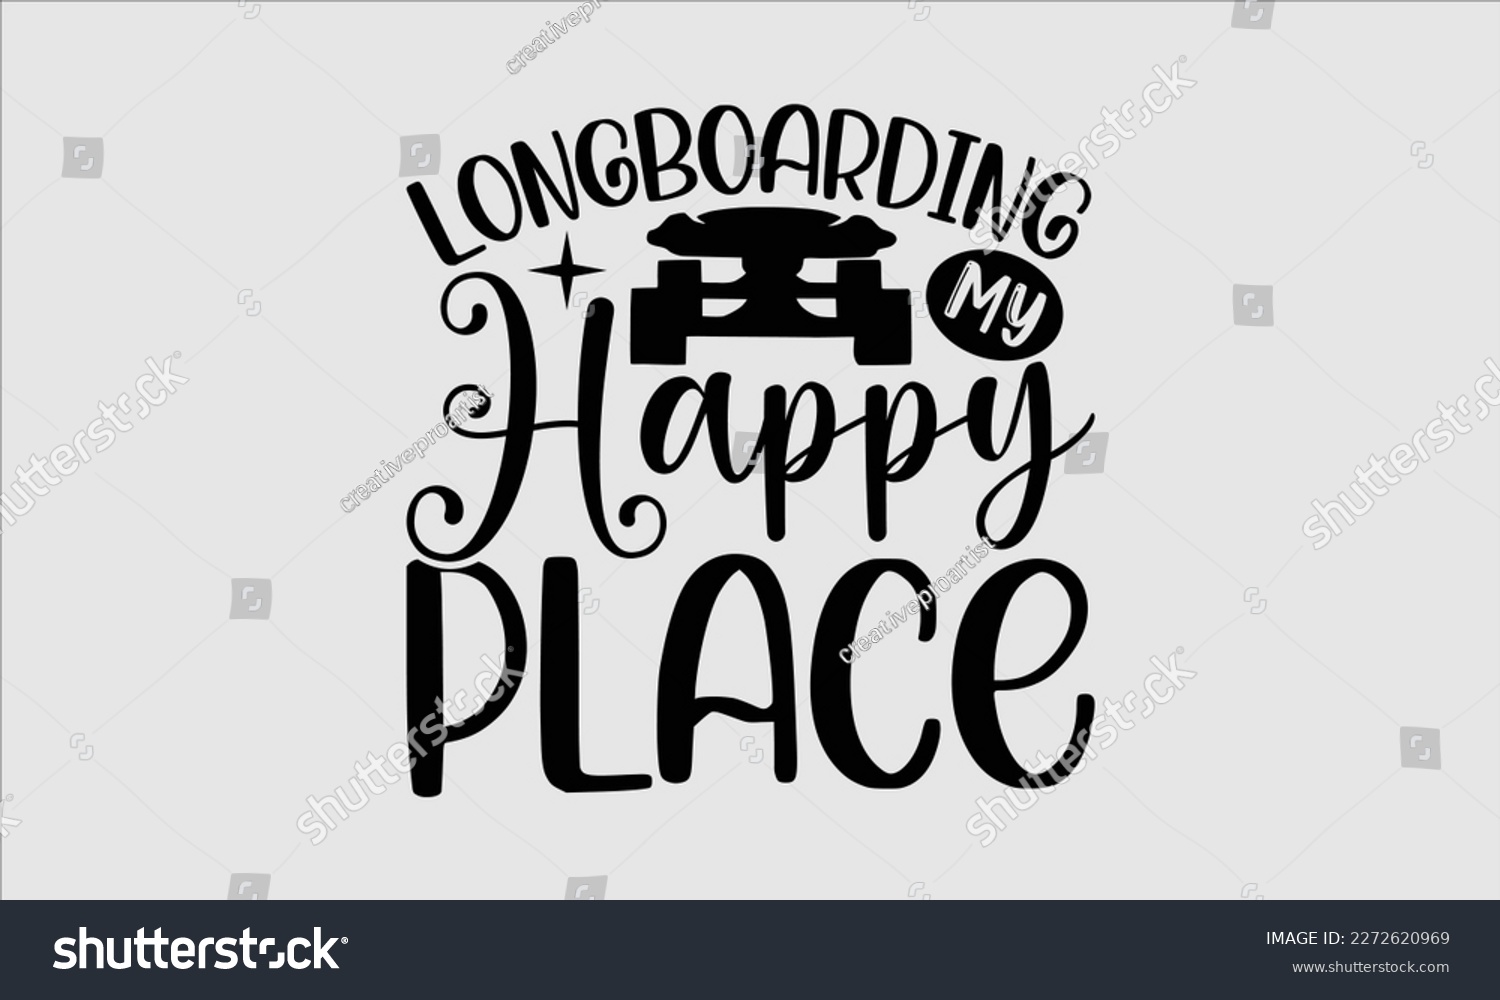 SVG of Longboarding my happy place- Longboarding T- shirt Design, Hand drawn lettering phrase, Illustration for prints on t-shirts and bags, posters, funny eps files, svg cricut svg